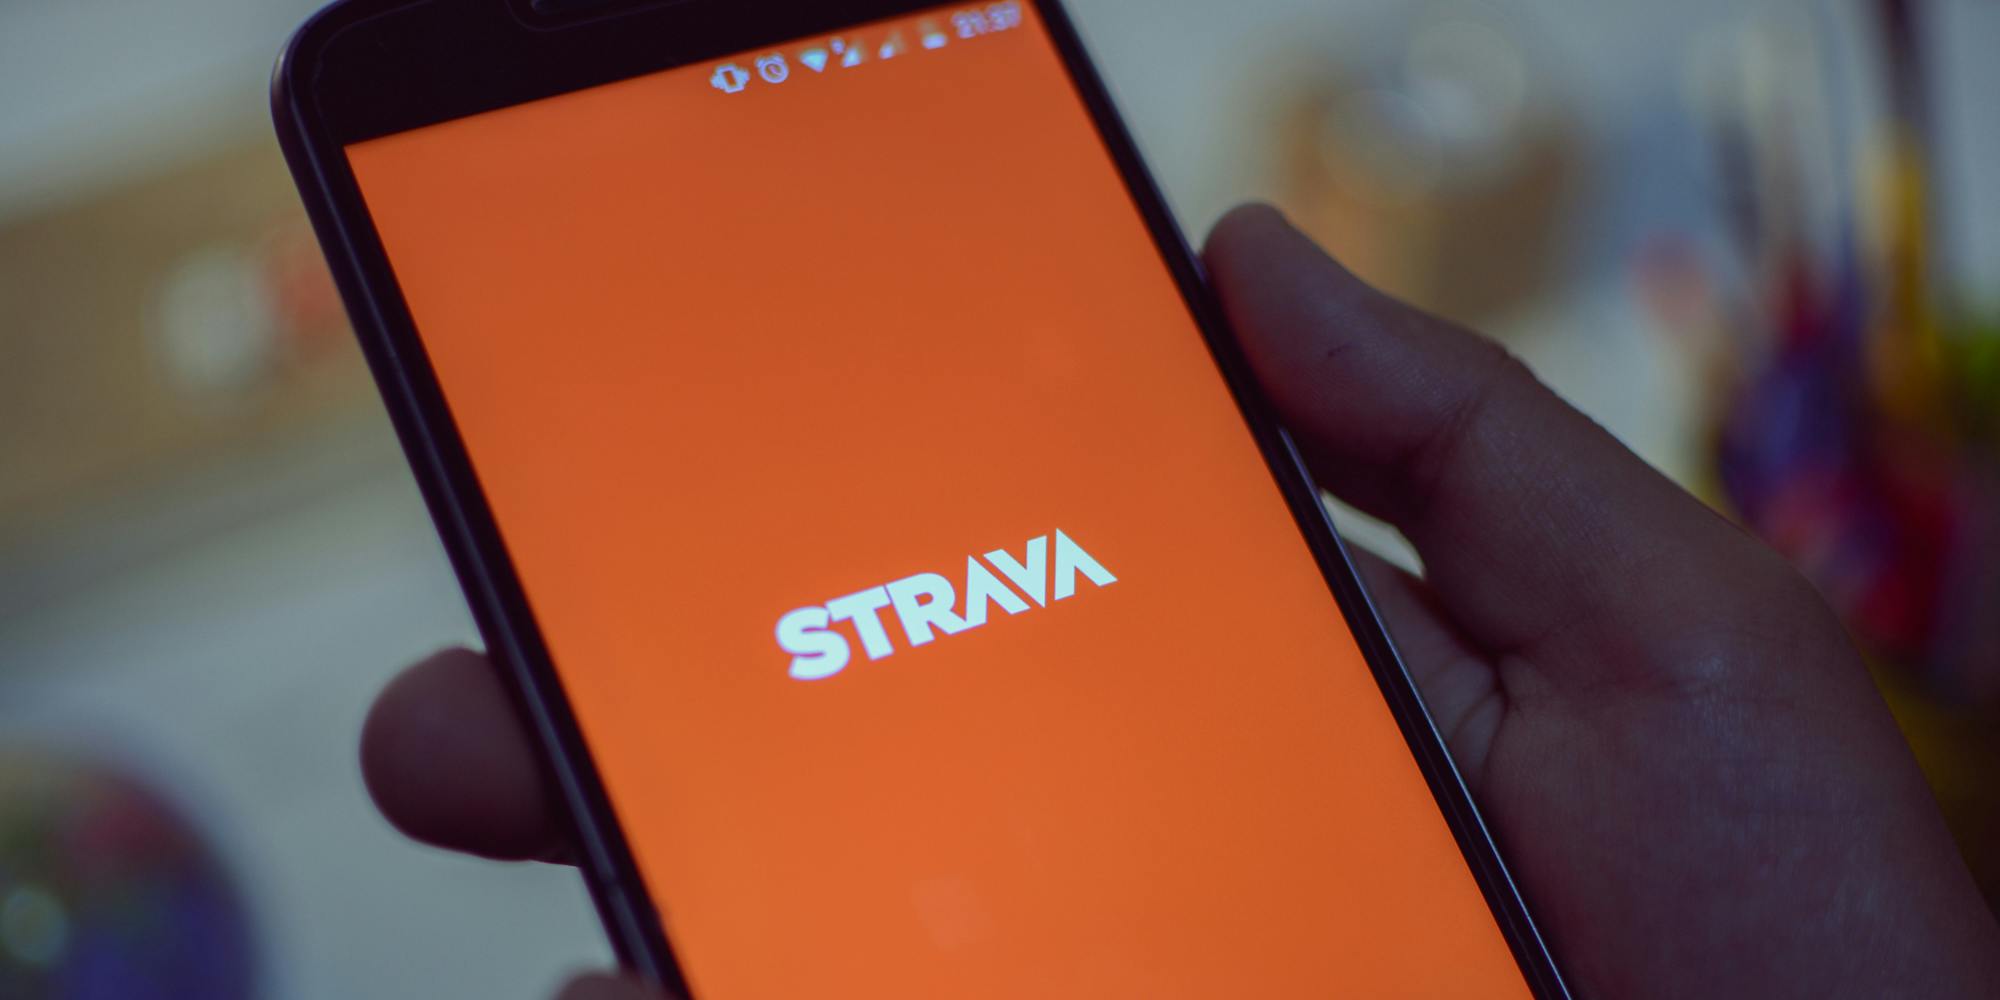 Strava fitness tracker app on phone screen in hand in front of blurred background